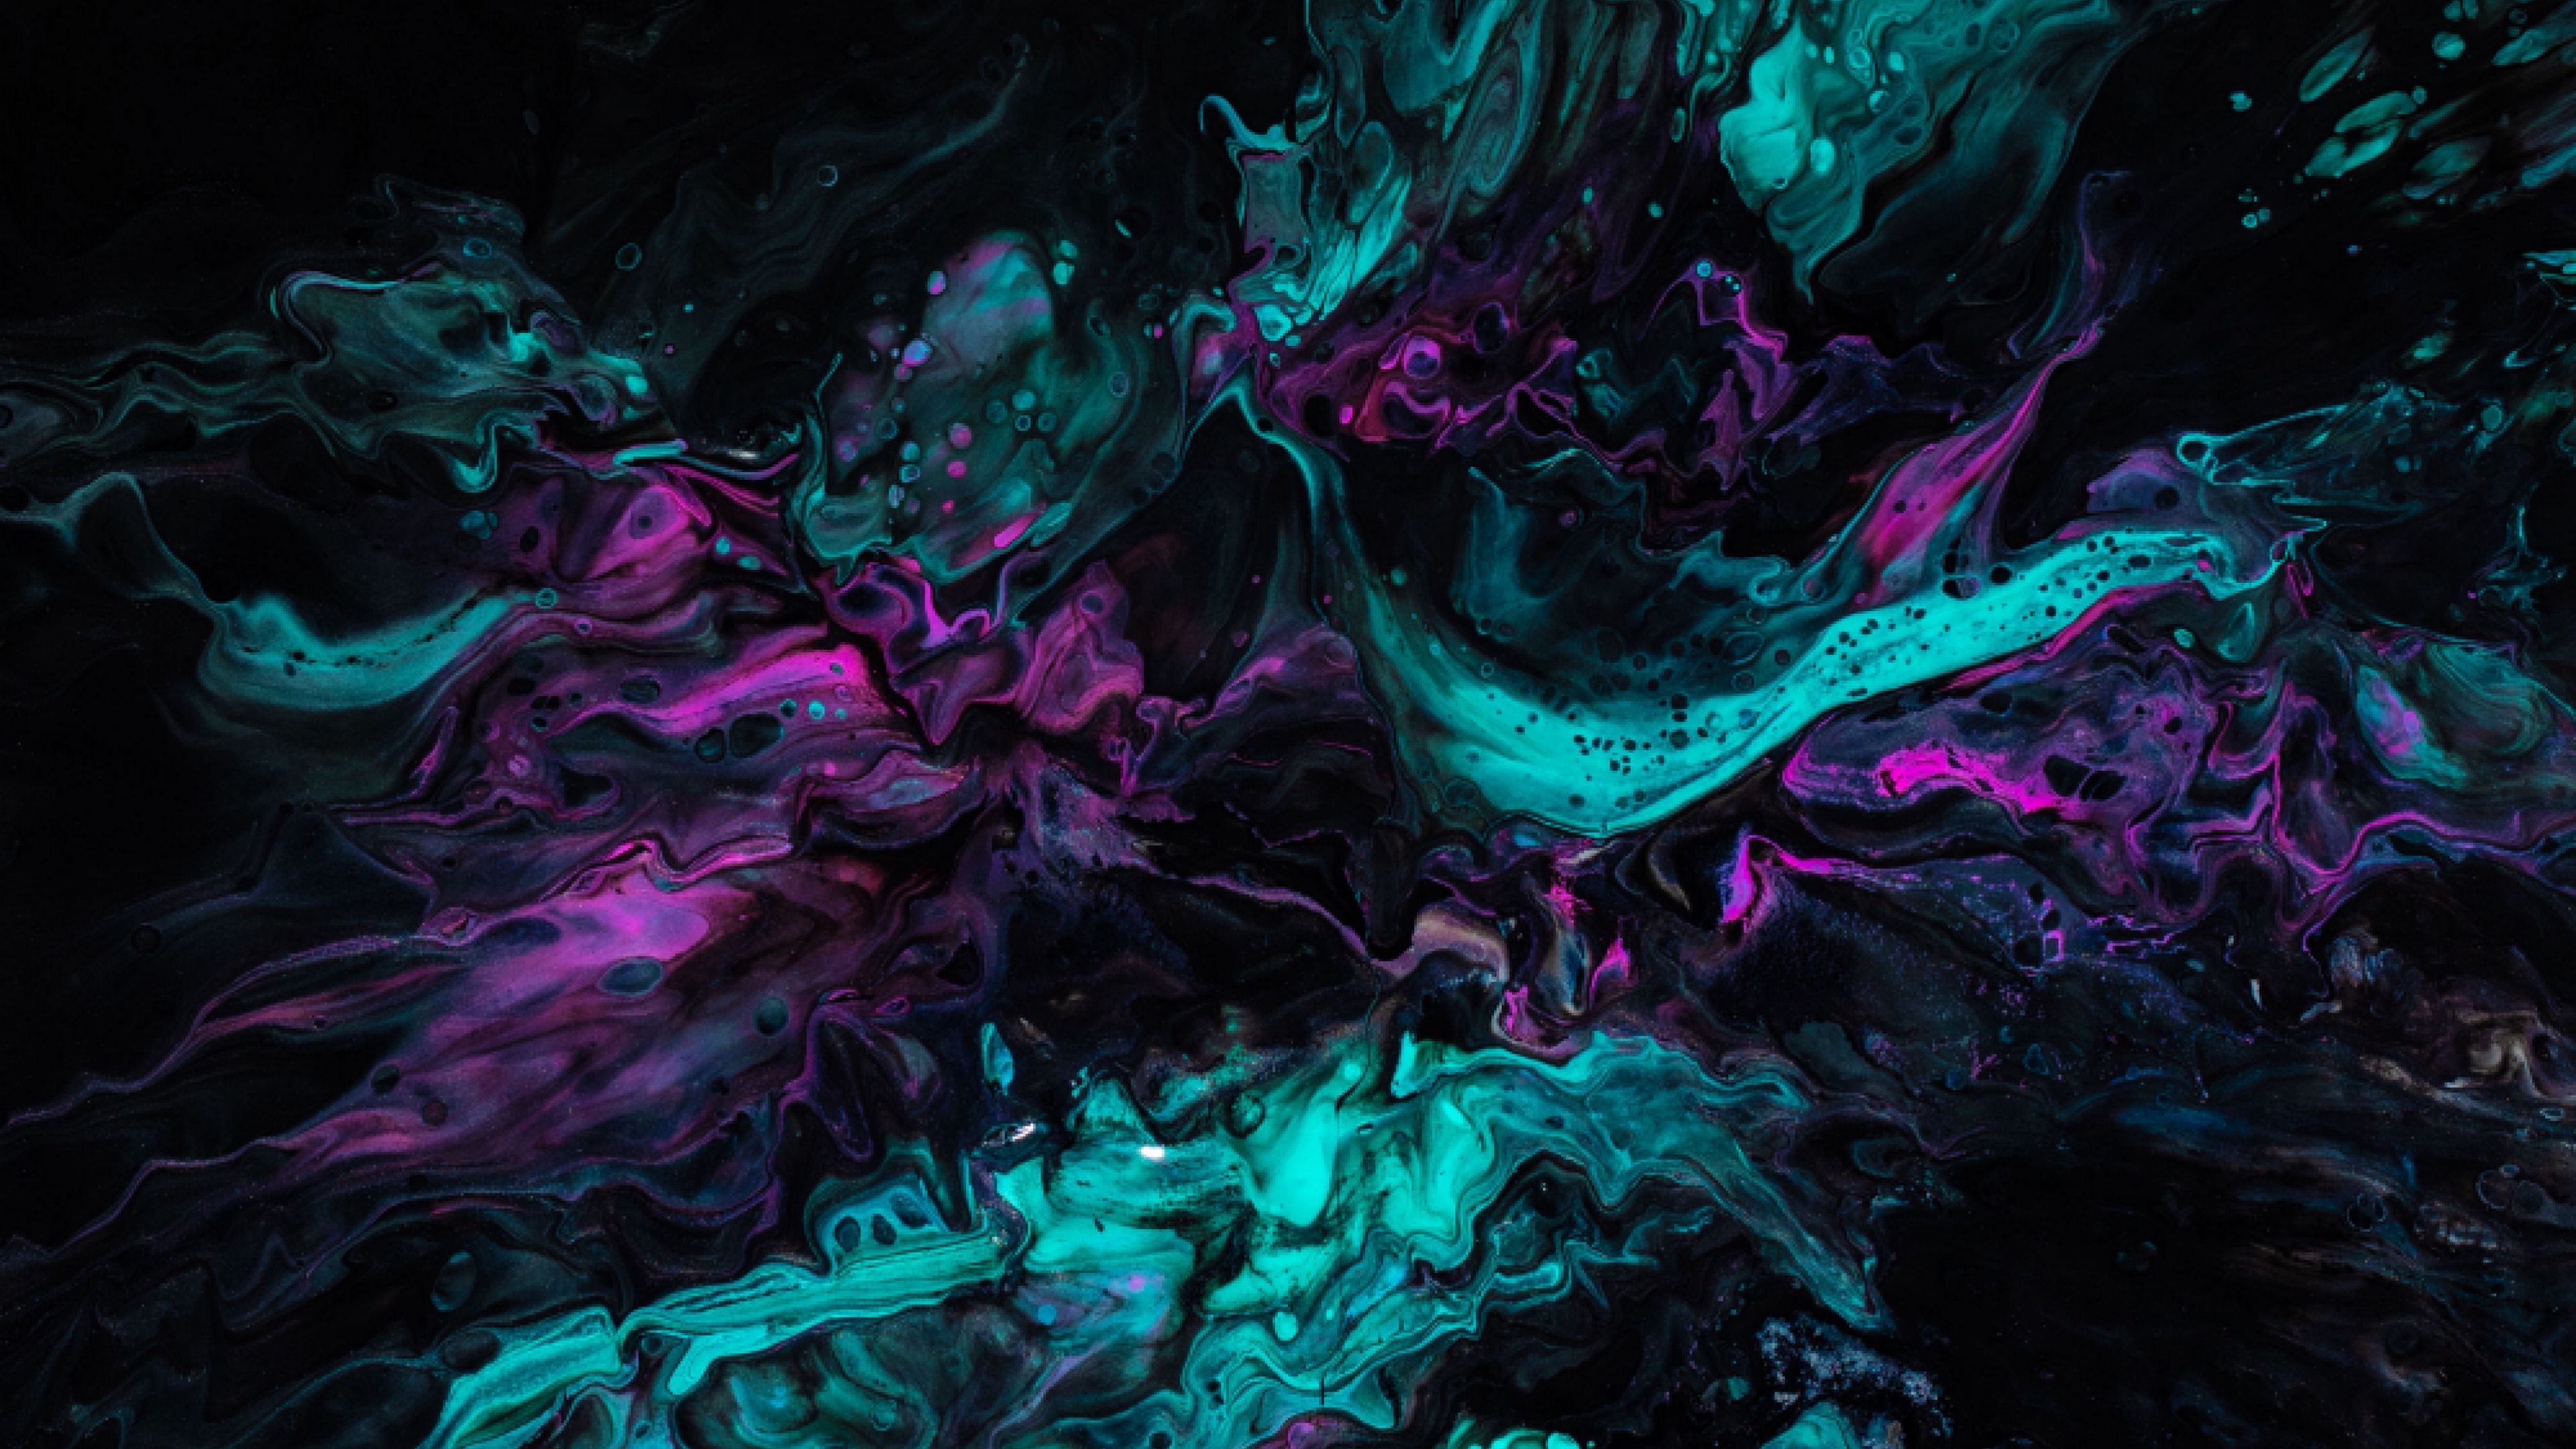 Download wallpaper 3840x2160 paint, stains, mixing, liquid